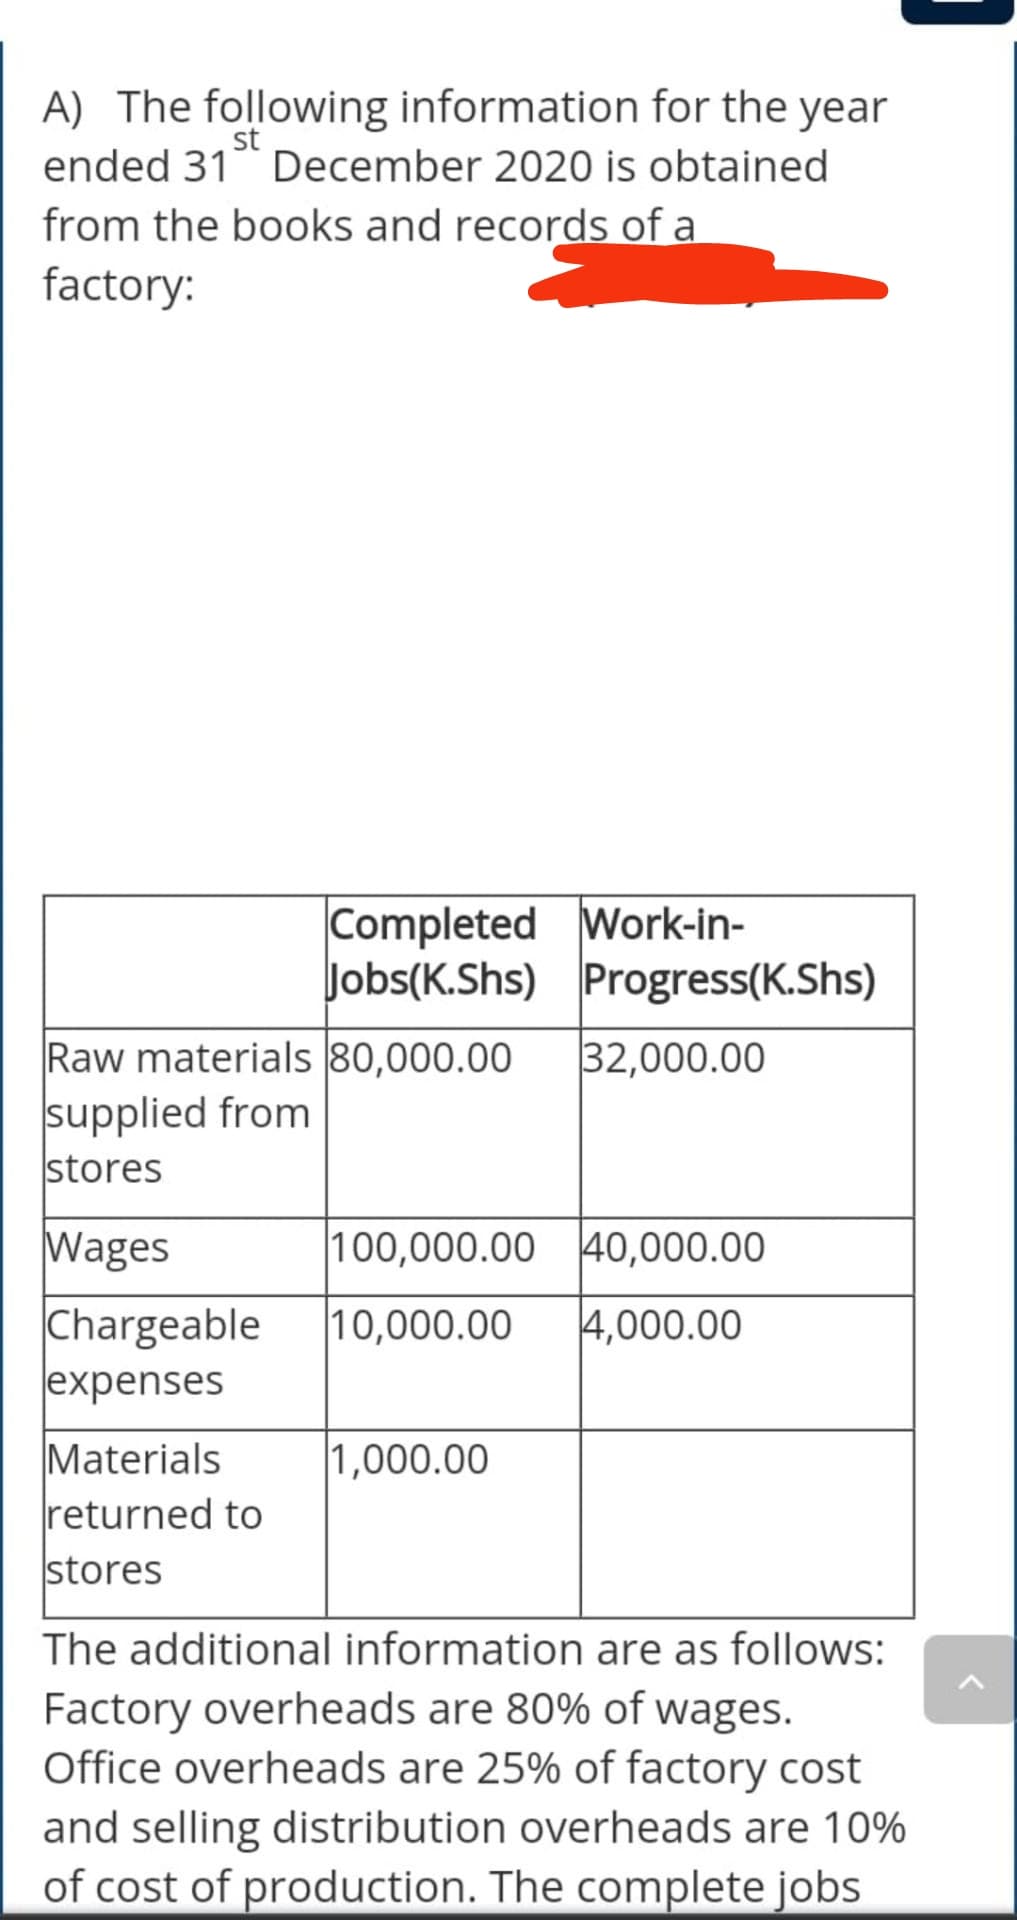 A) The following information for the year
ended 31 December 2020 is obtained
from the books and records of a
factory:
st
Completed Work-in-
Jobs(K.Shs) Progress(K.Shs)
Raw materials 80,000.00
32,000.00
supplied from
stores
100,000.00 40,000.00
Wages
Chargeable
expenses
|10,000.00
4,000.00
1,000.00
Materials
returned to
stores
The additional information are as follows:
Factory overheads are 80% of wages.
Office overheads are 25% of factory cost
and selling distribution overheads are 10%
of cost of production. The complete jobs
